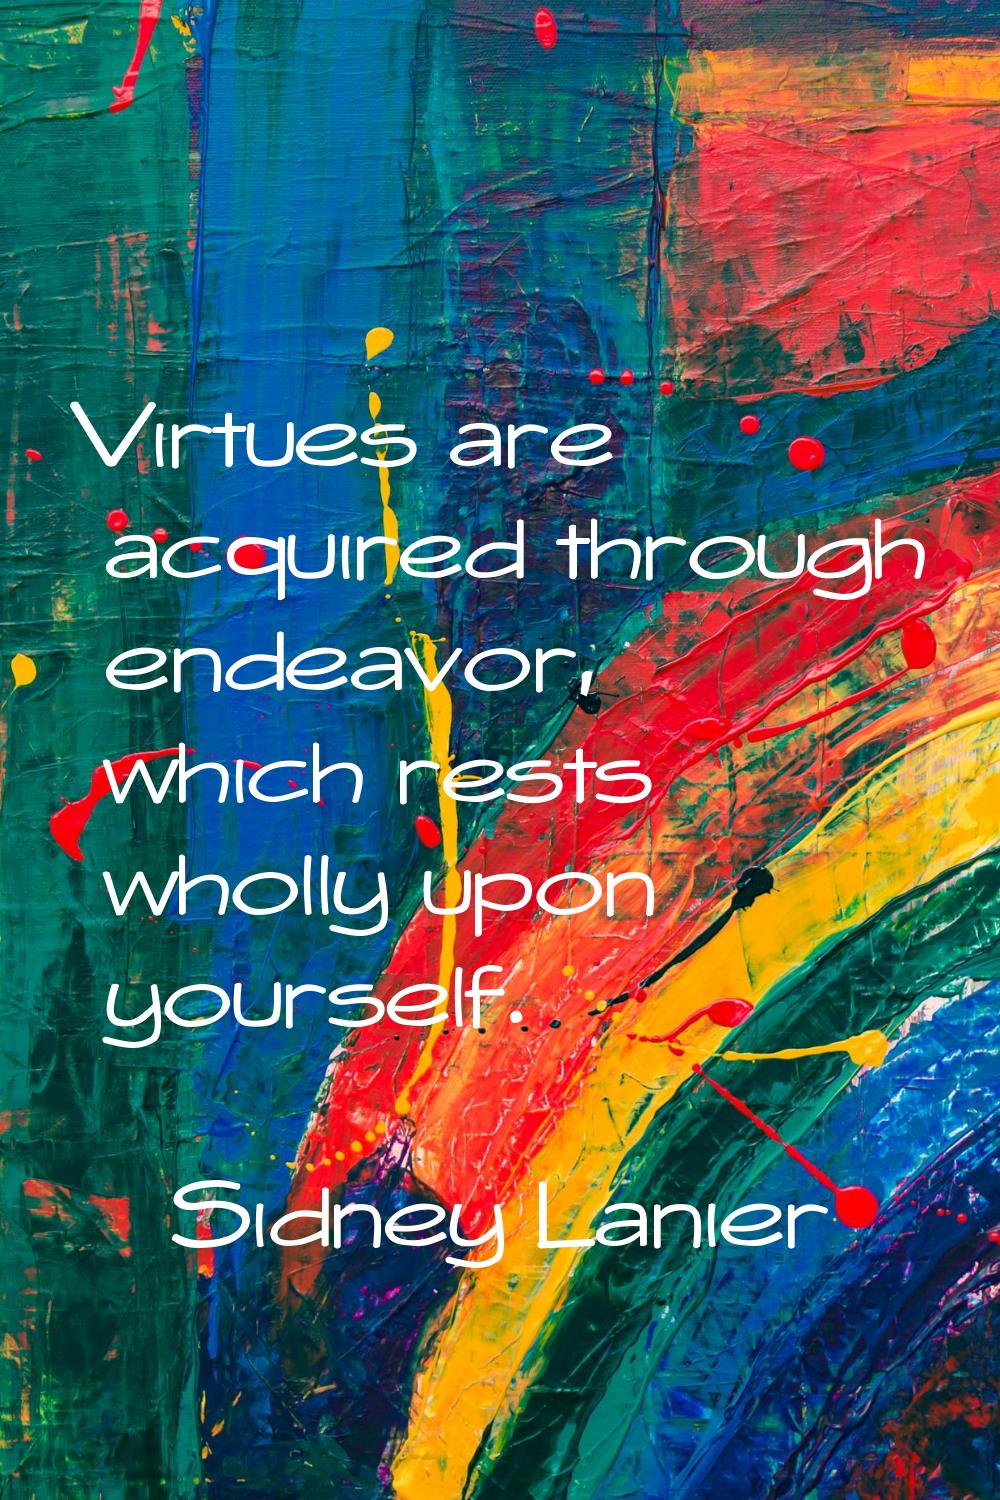 Virtues are acquired through endeavor, which rests wholly upon yourself.